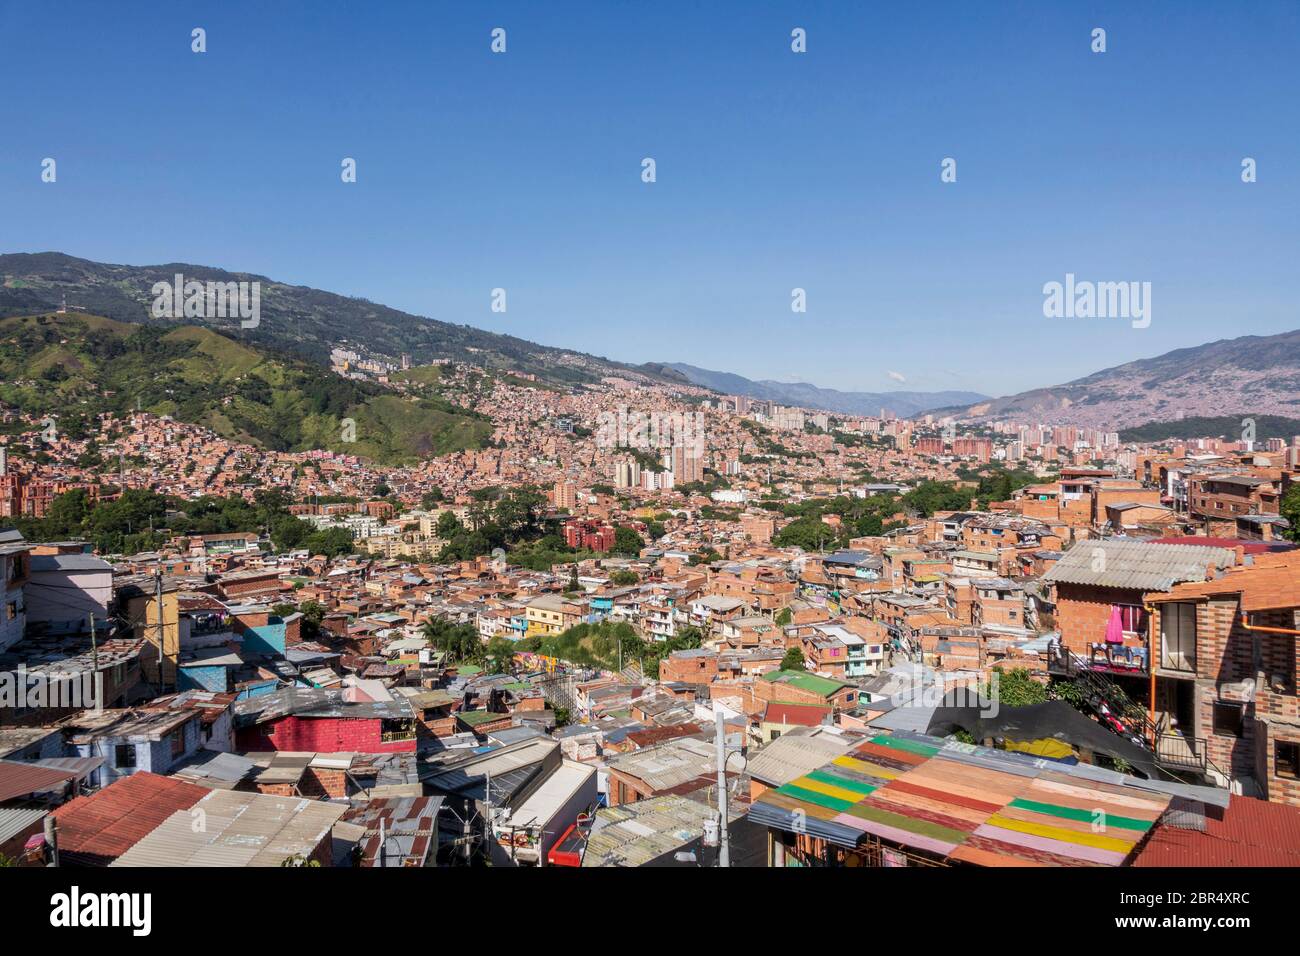 Medellin - Colombia - 10. January 2020:: View of a poor neighborhood in the hills above Medellin, Colombia Stock Photo